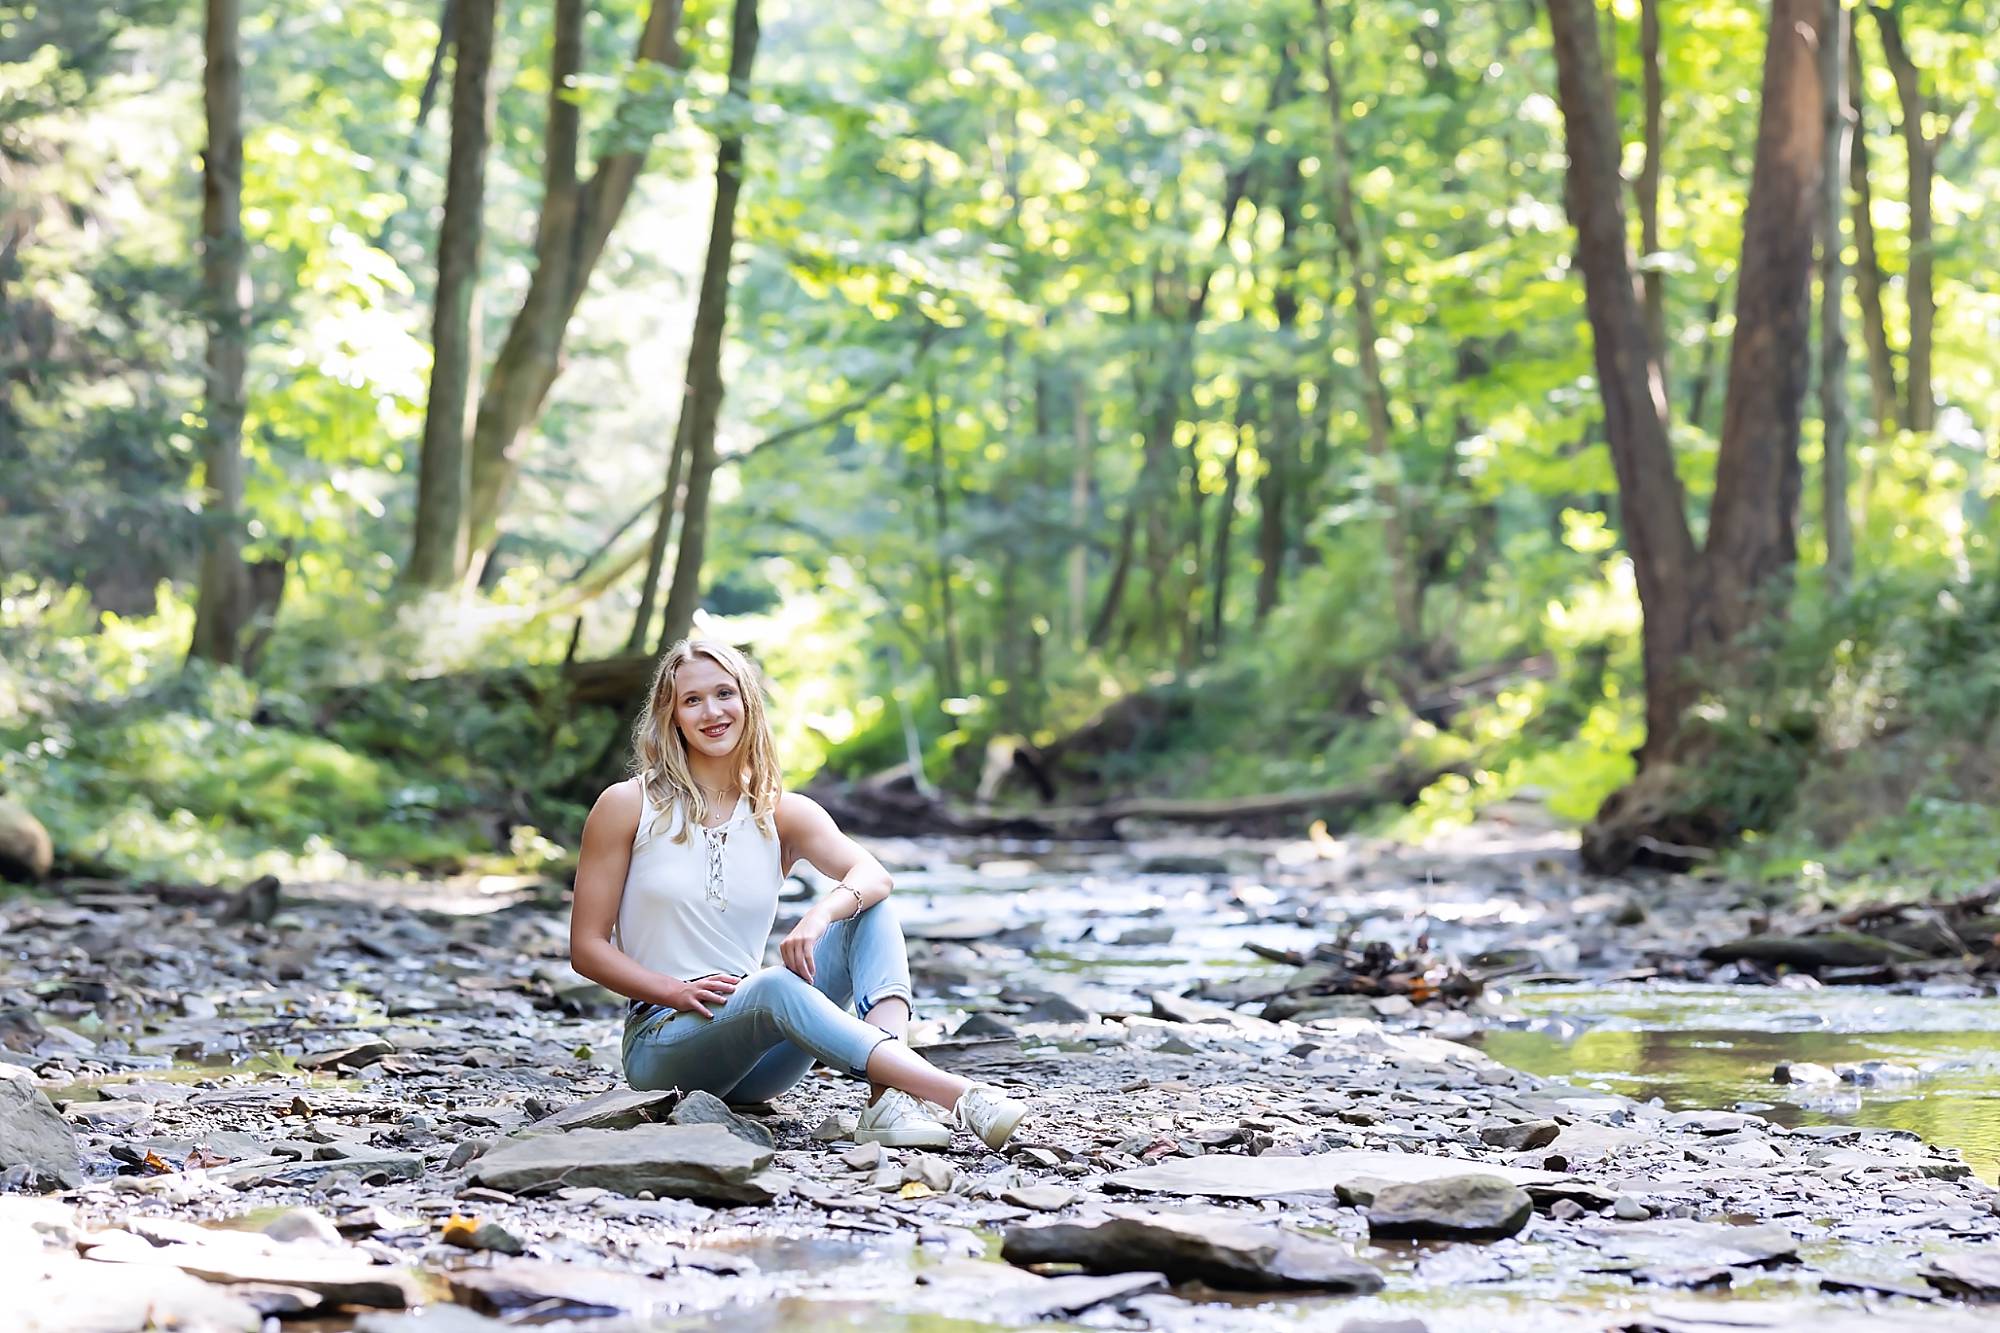 image of a senior girl wearing a white top and jeans sitting on a rock in a shallow creek bed.